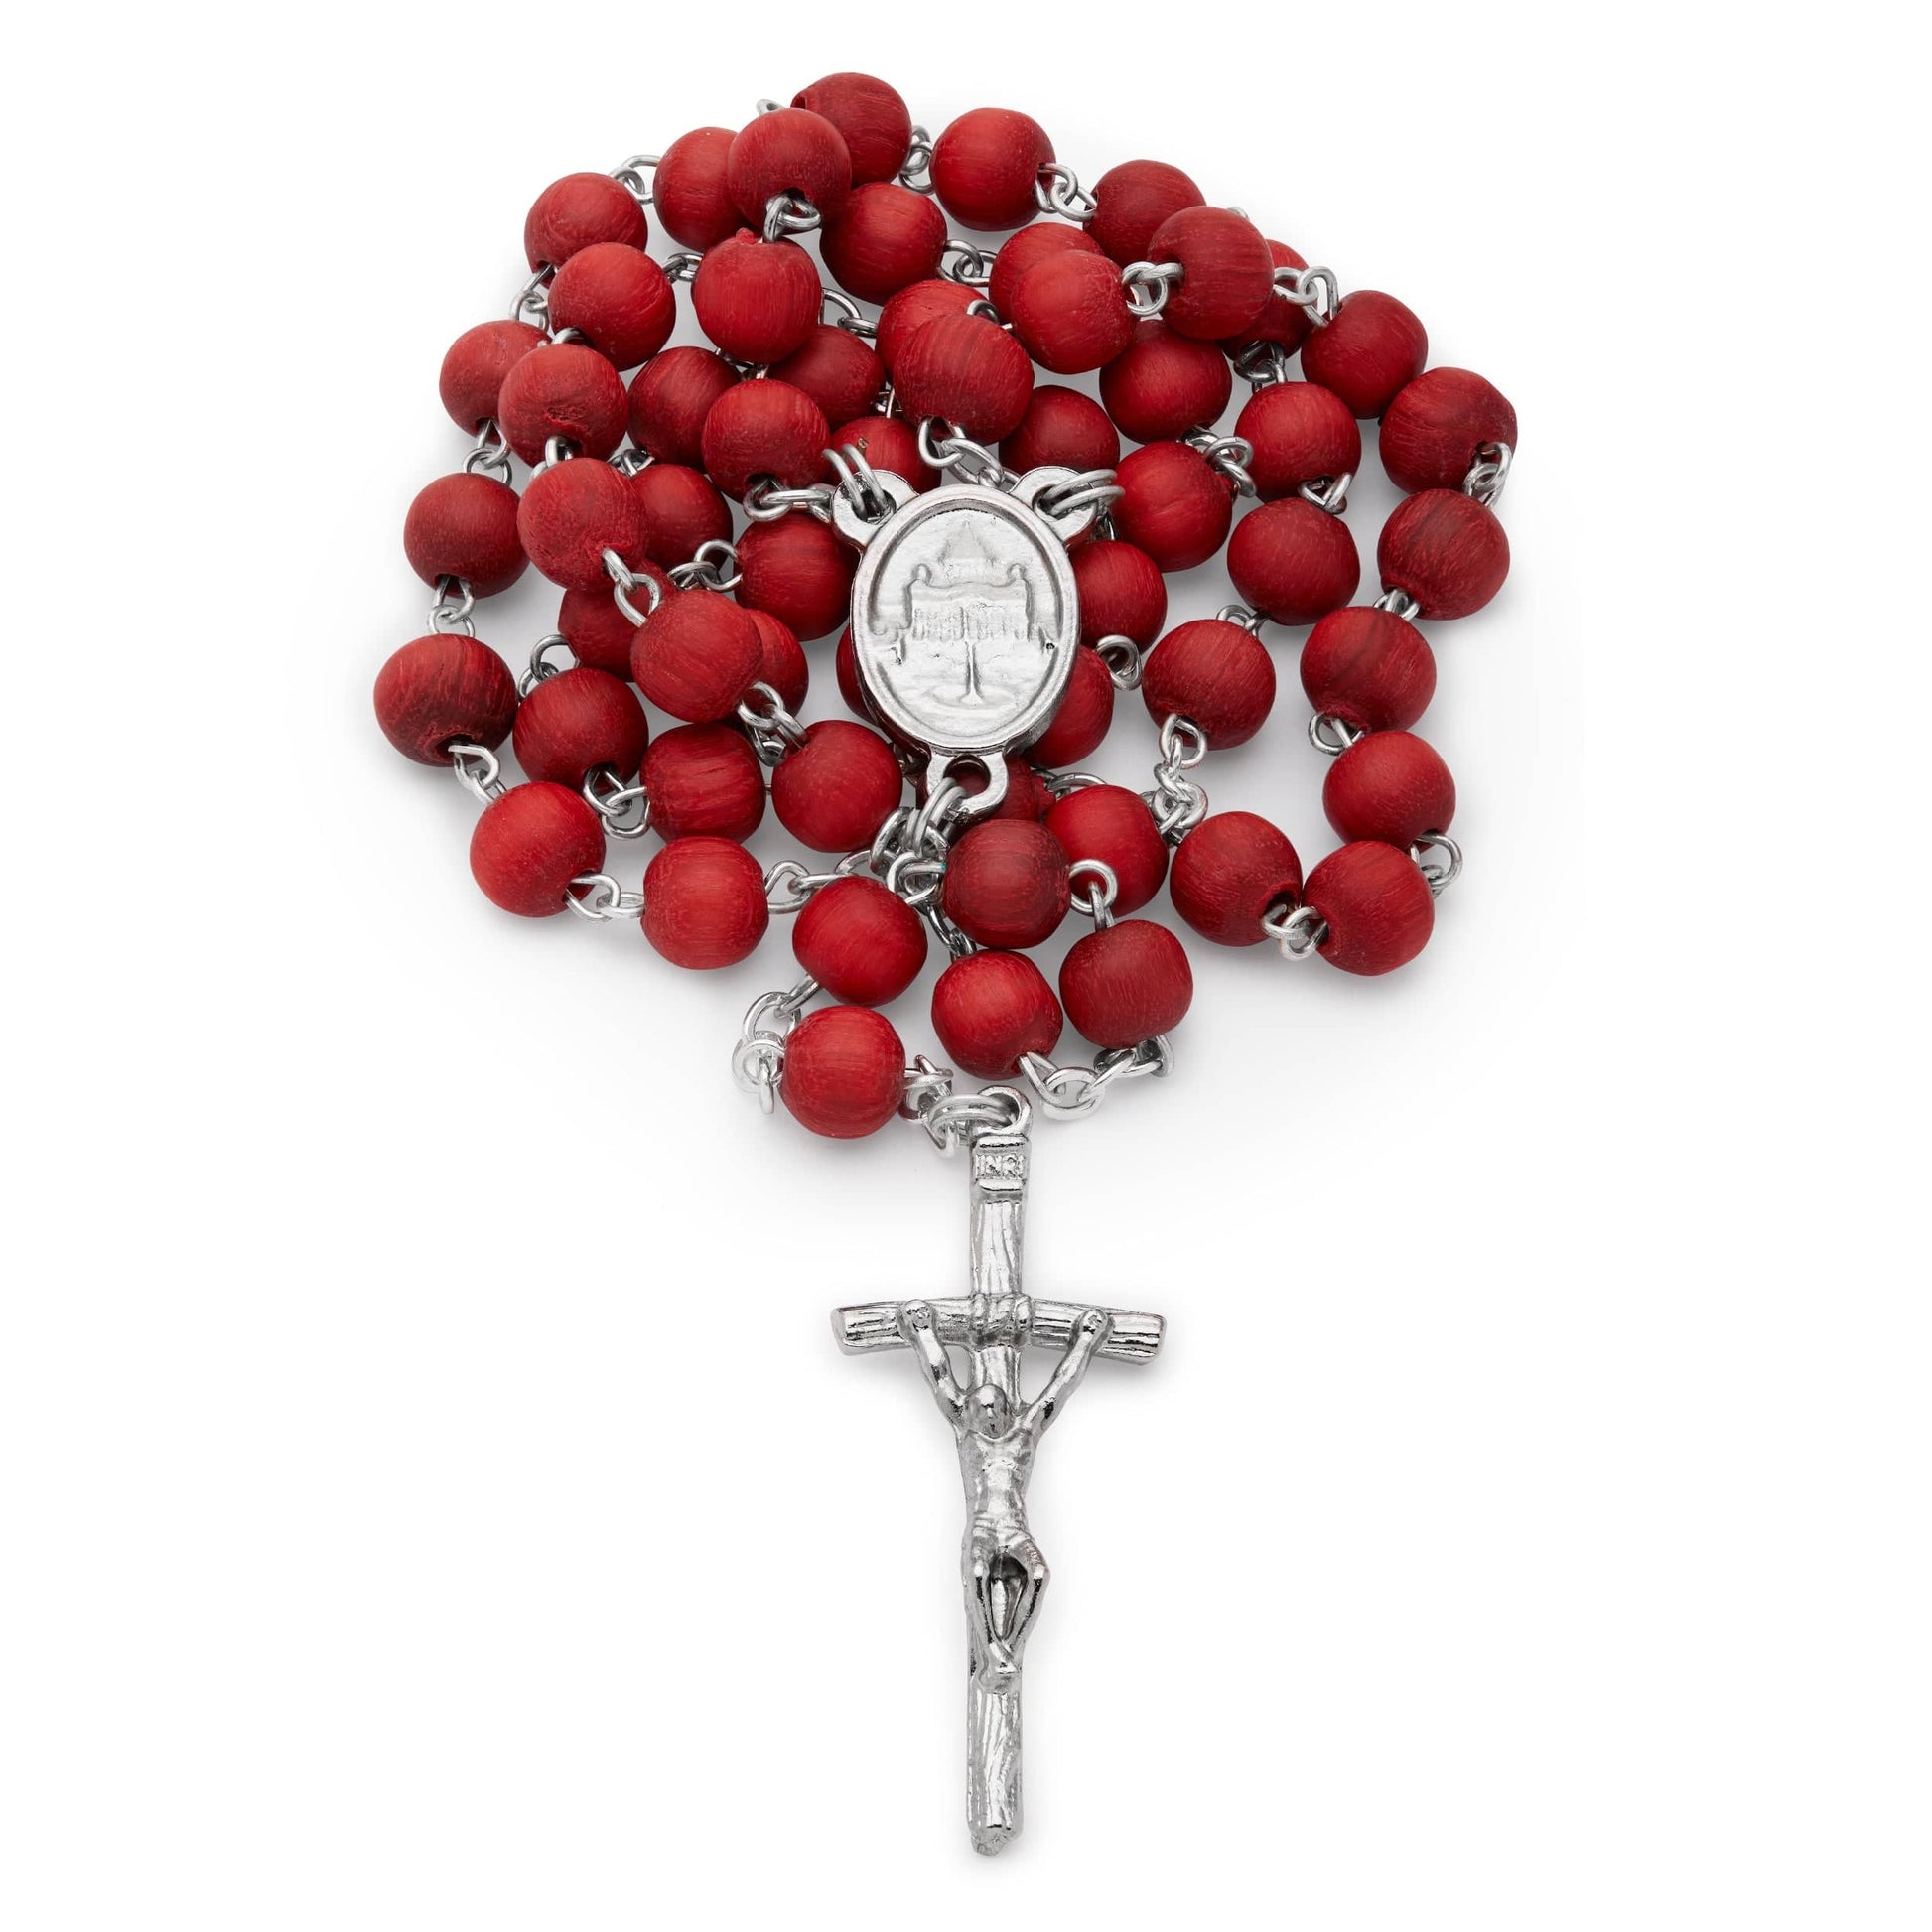 MONDO CATTOLICO Prayer Beads 45 cm (17.71 in) / 6 mm (0.23 in) Rosary box of Pope Francis I with a Scent of Rose